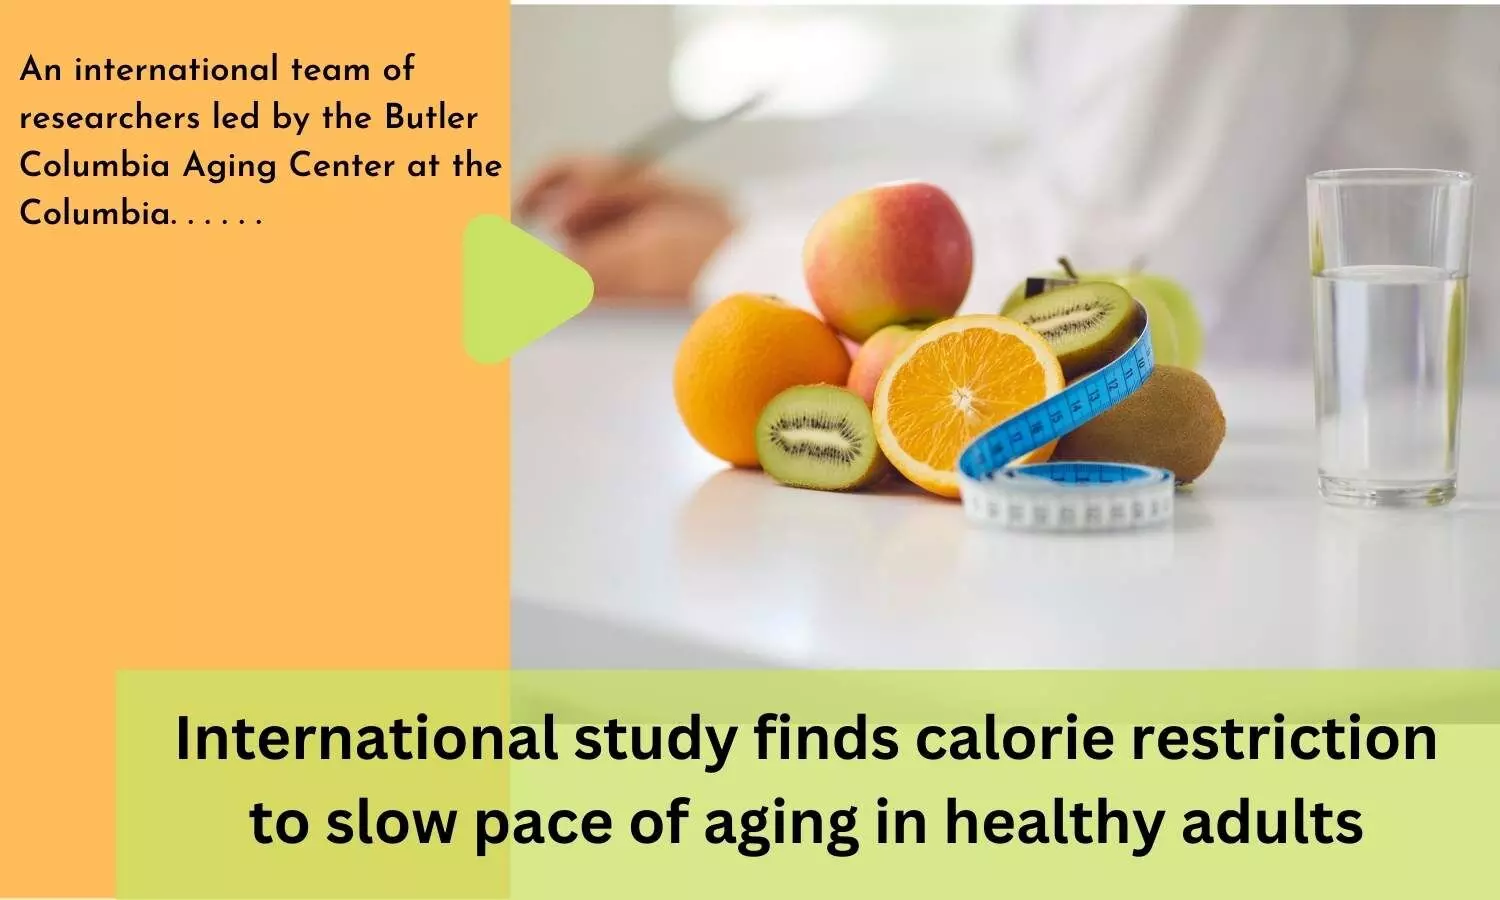 International study finds calorie restriction to slow pace of aging in healthy adults